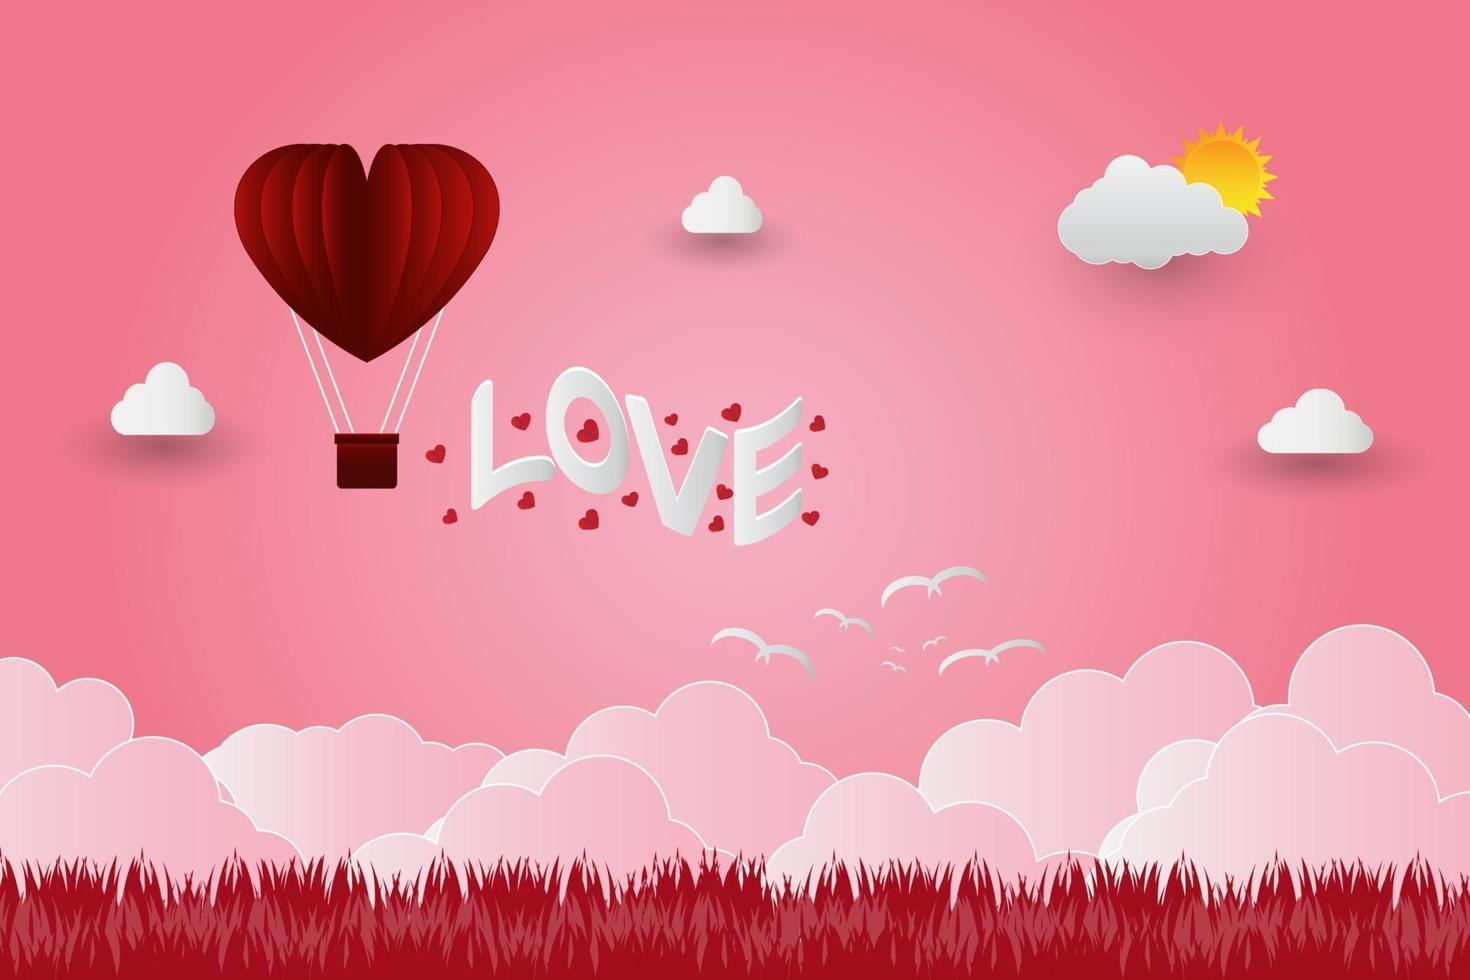 Valentine's day balloons in heart shape flying over grass view background, paper art style. vector